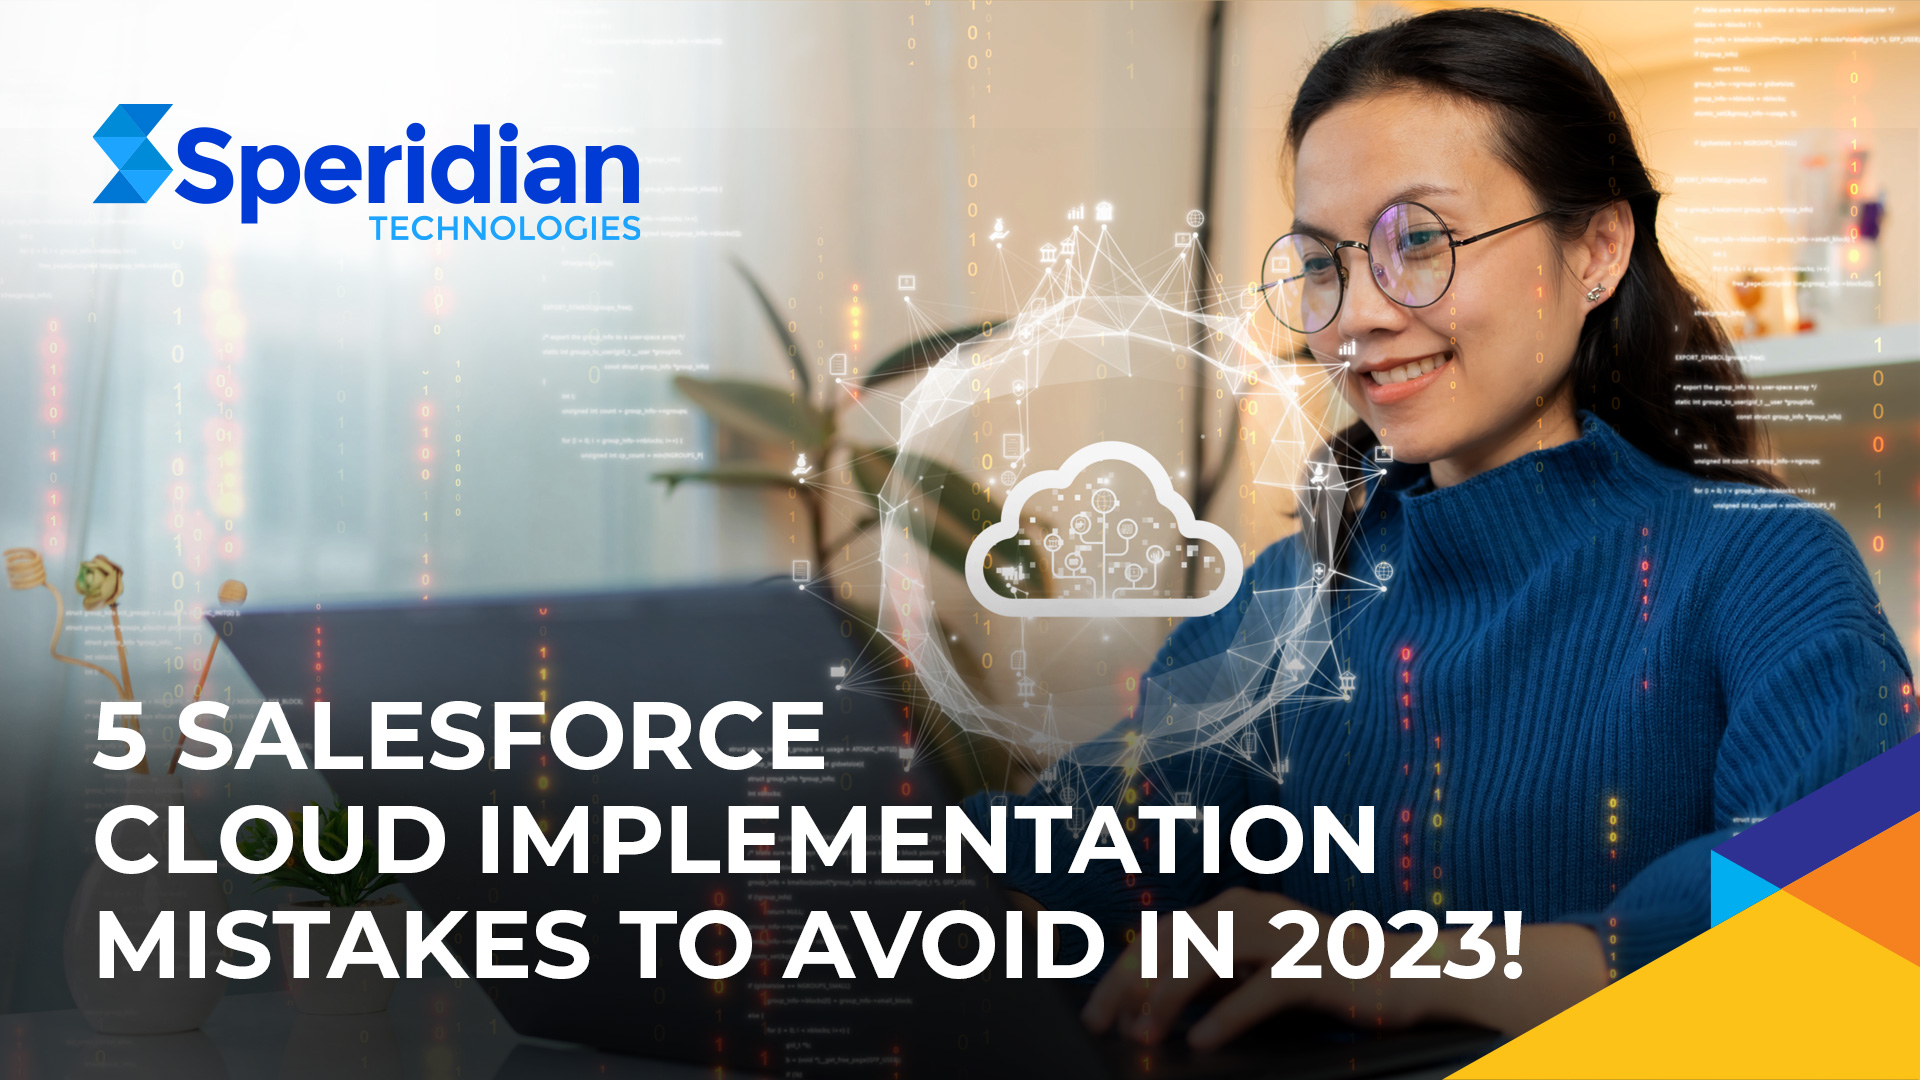 5 Salesforce Cloud Implementation Mistakes to Avoid in 2023!